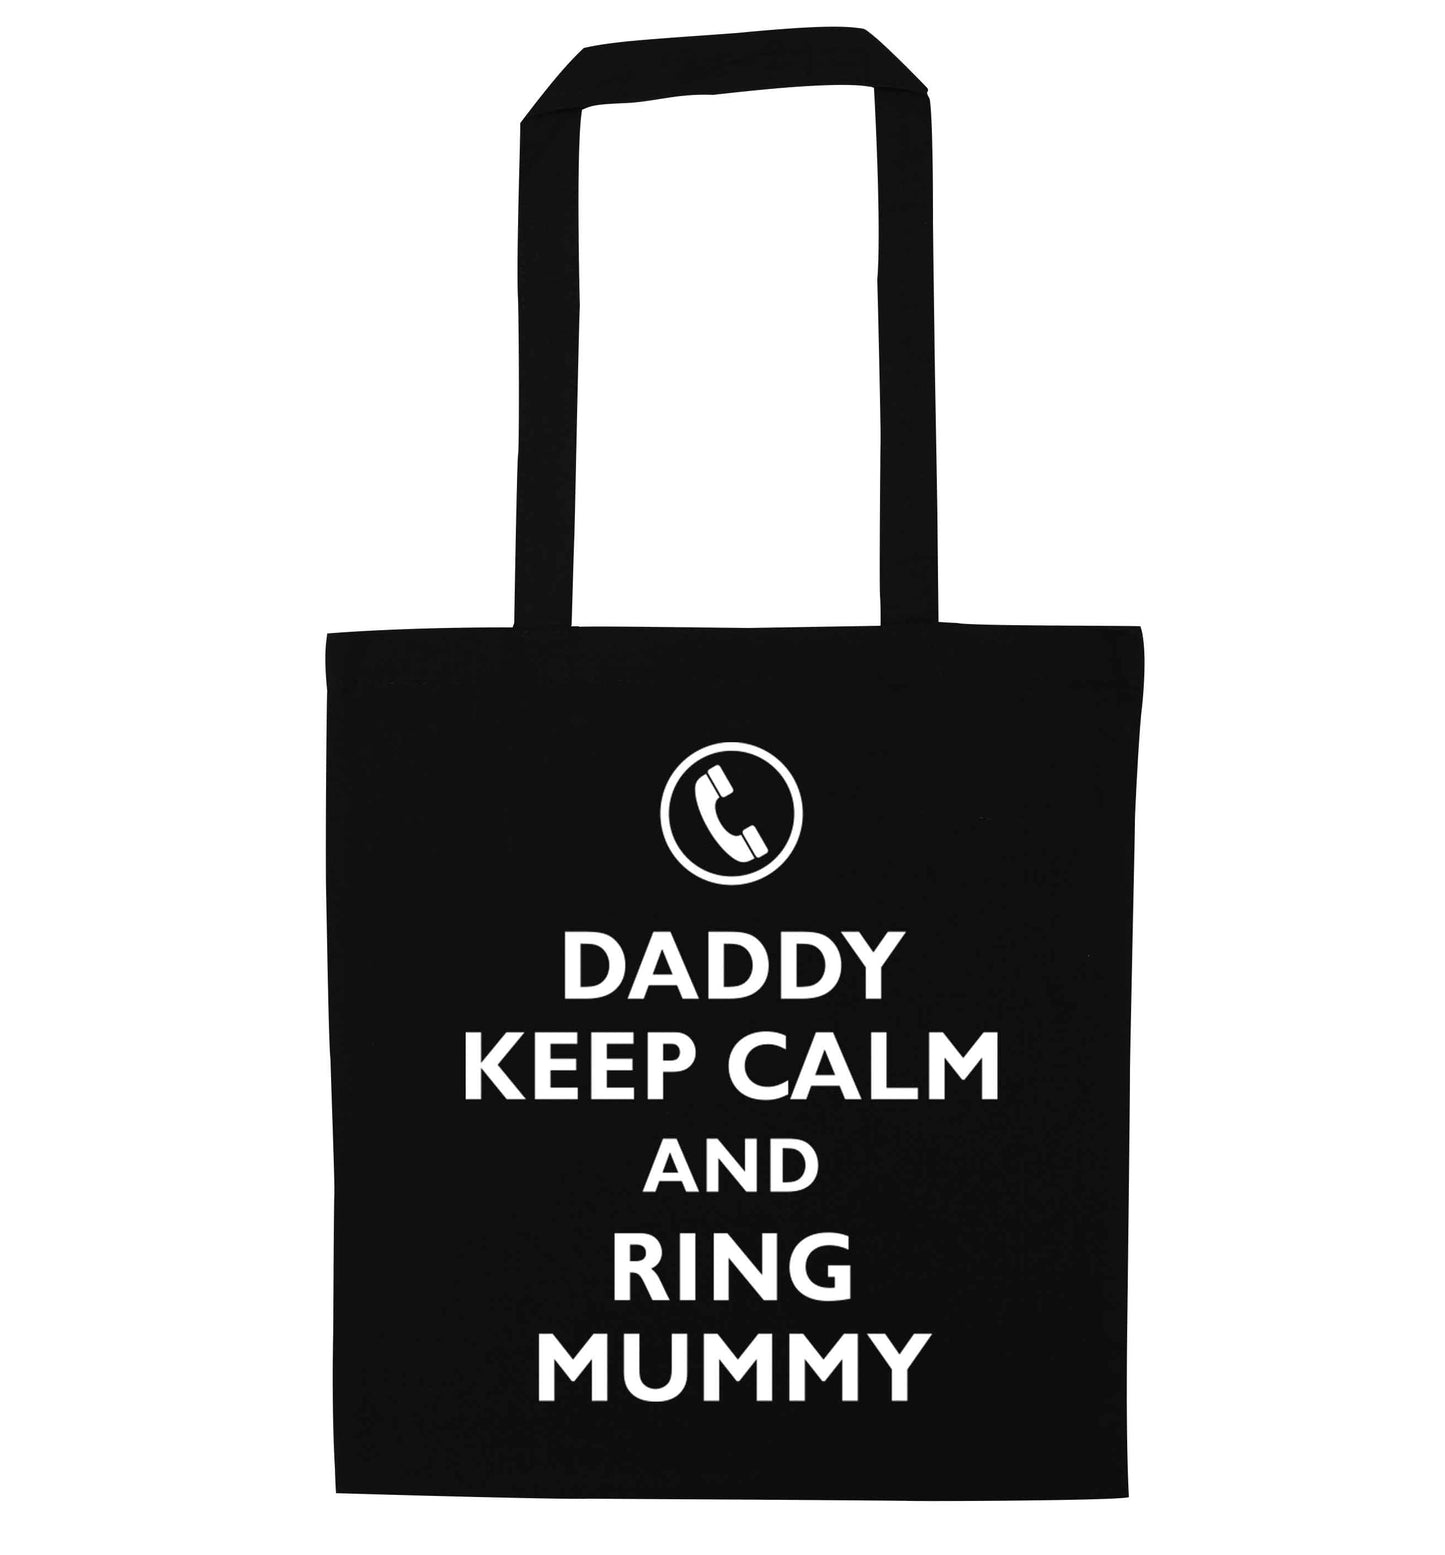 Daddy keep calm and ring mummy black tote bag